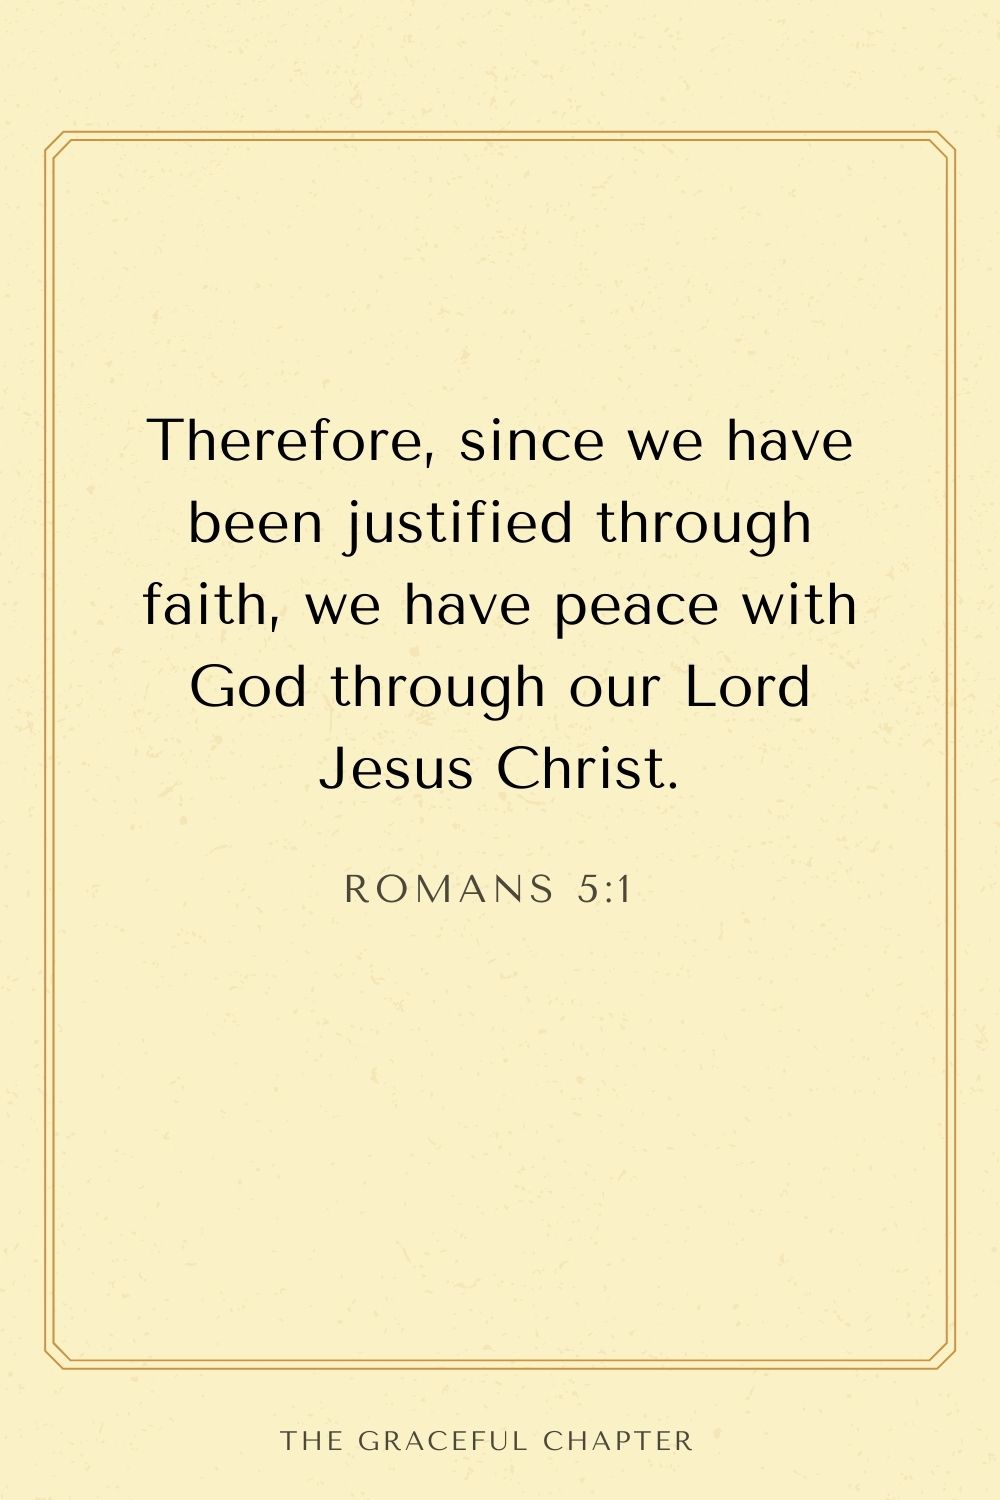 Therefore, since we have been justified through faith, we have peace with God through our Lord Jesus Christ. Romans 5:1